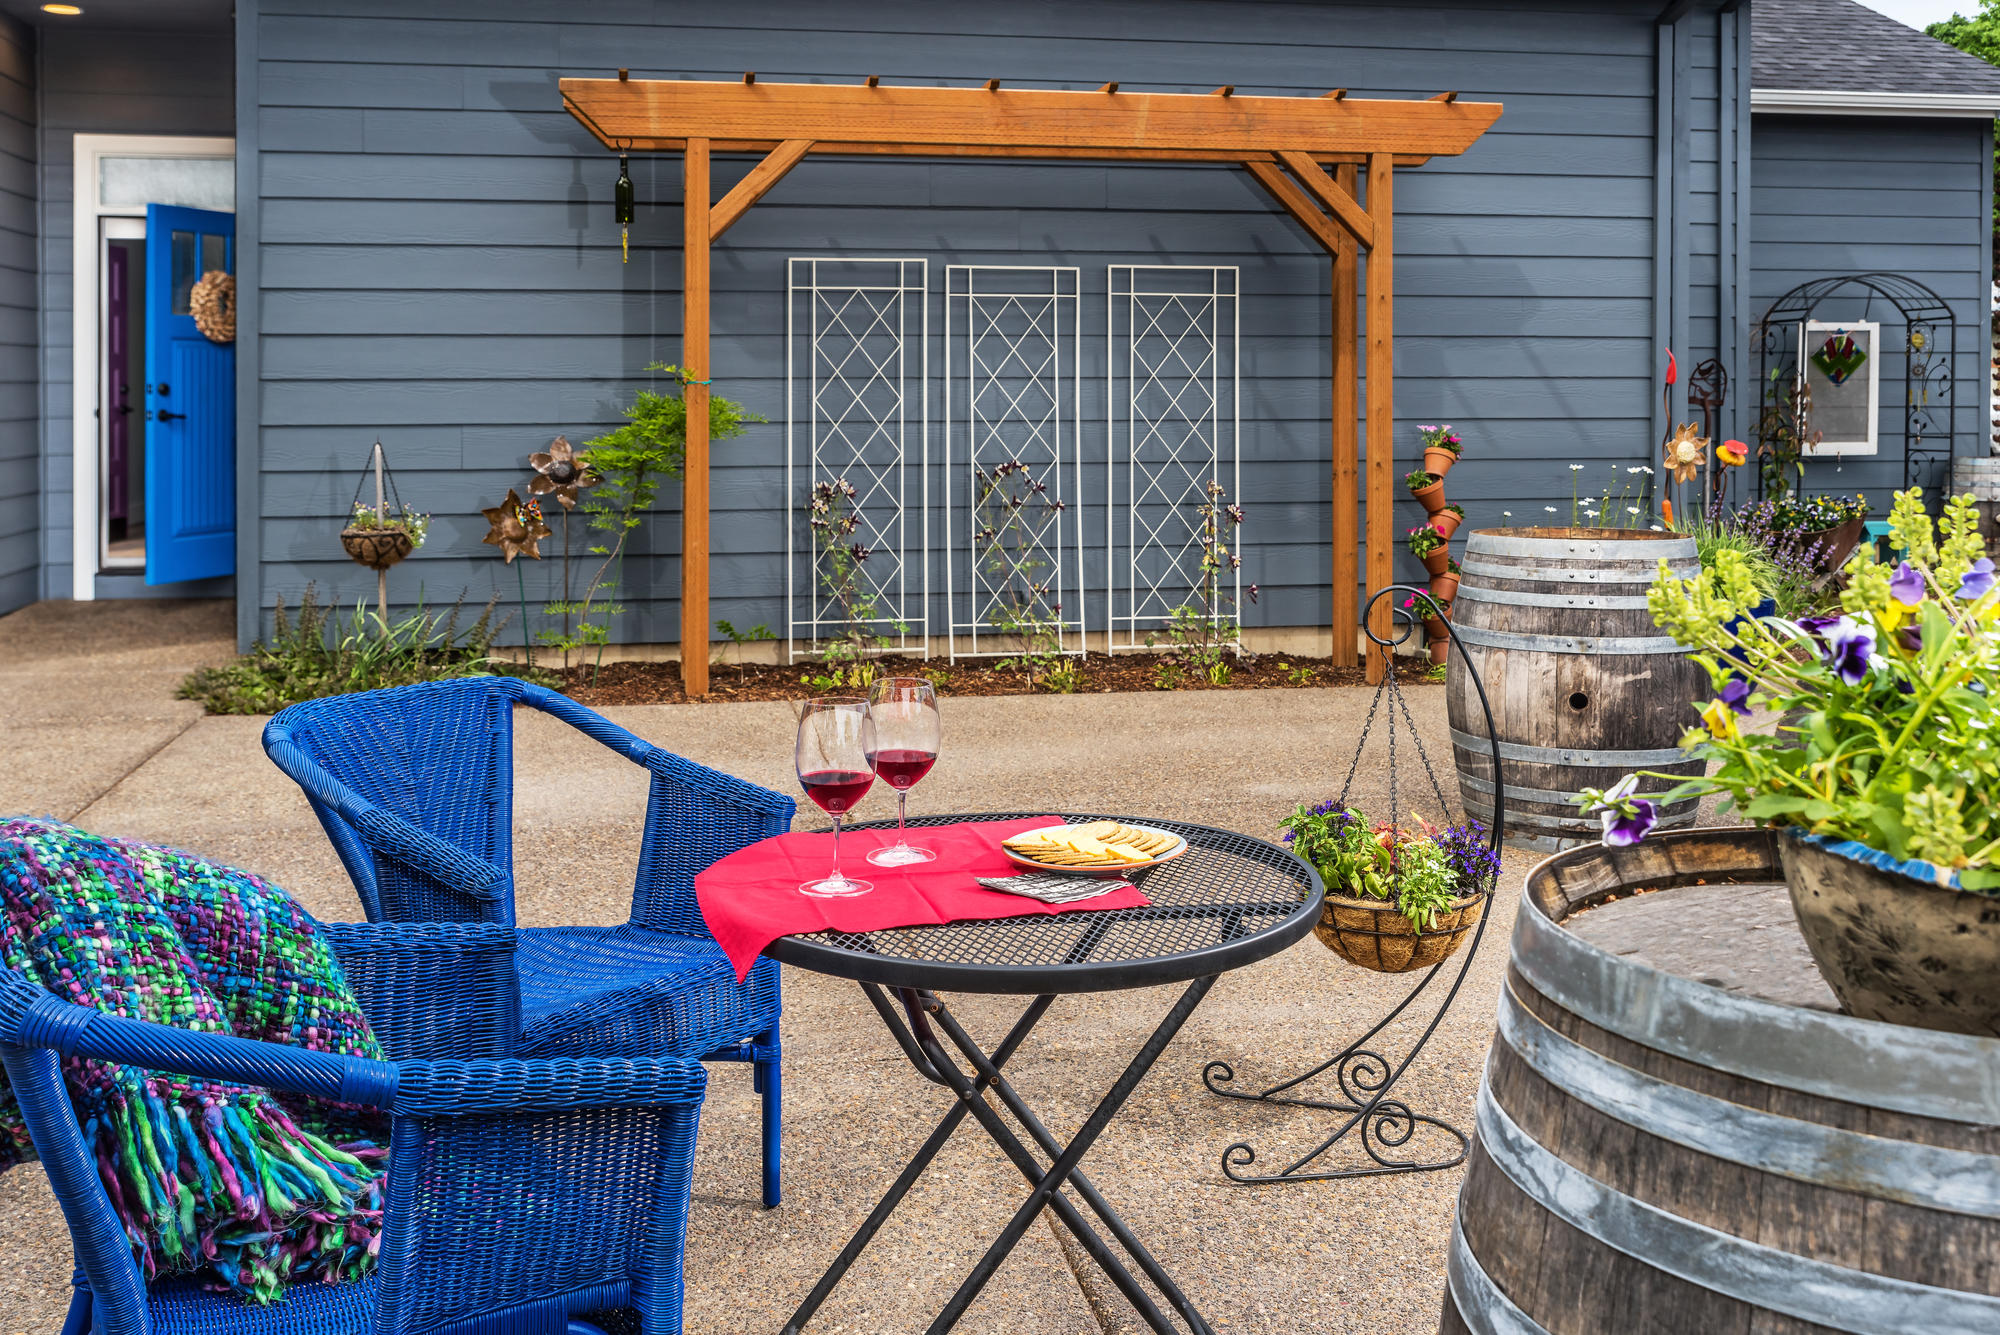 Patio with blue wicker chairs at a small table, plants, wine barrels.